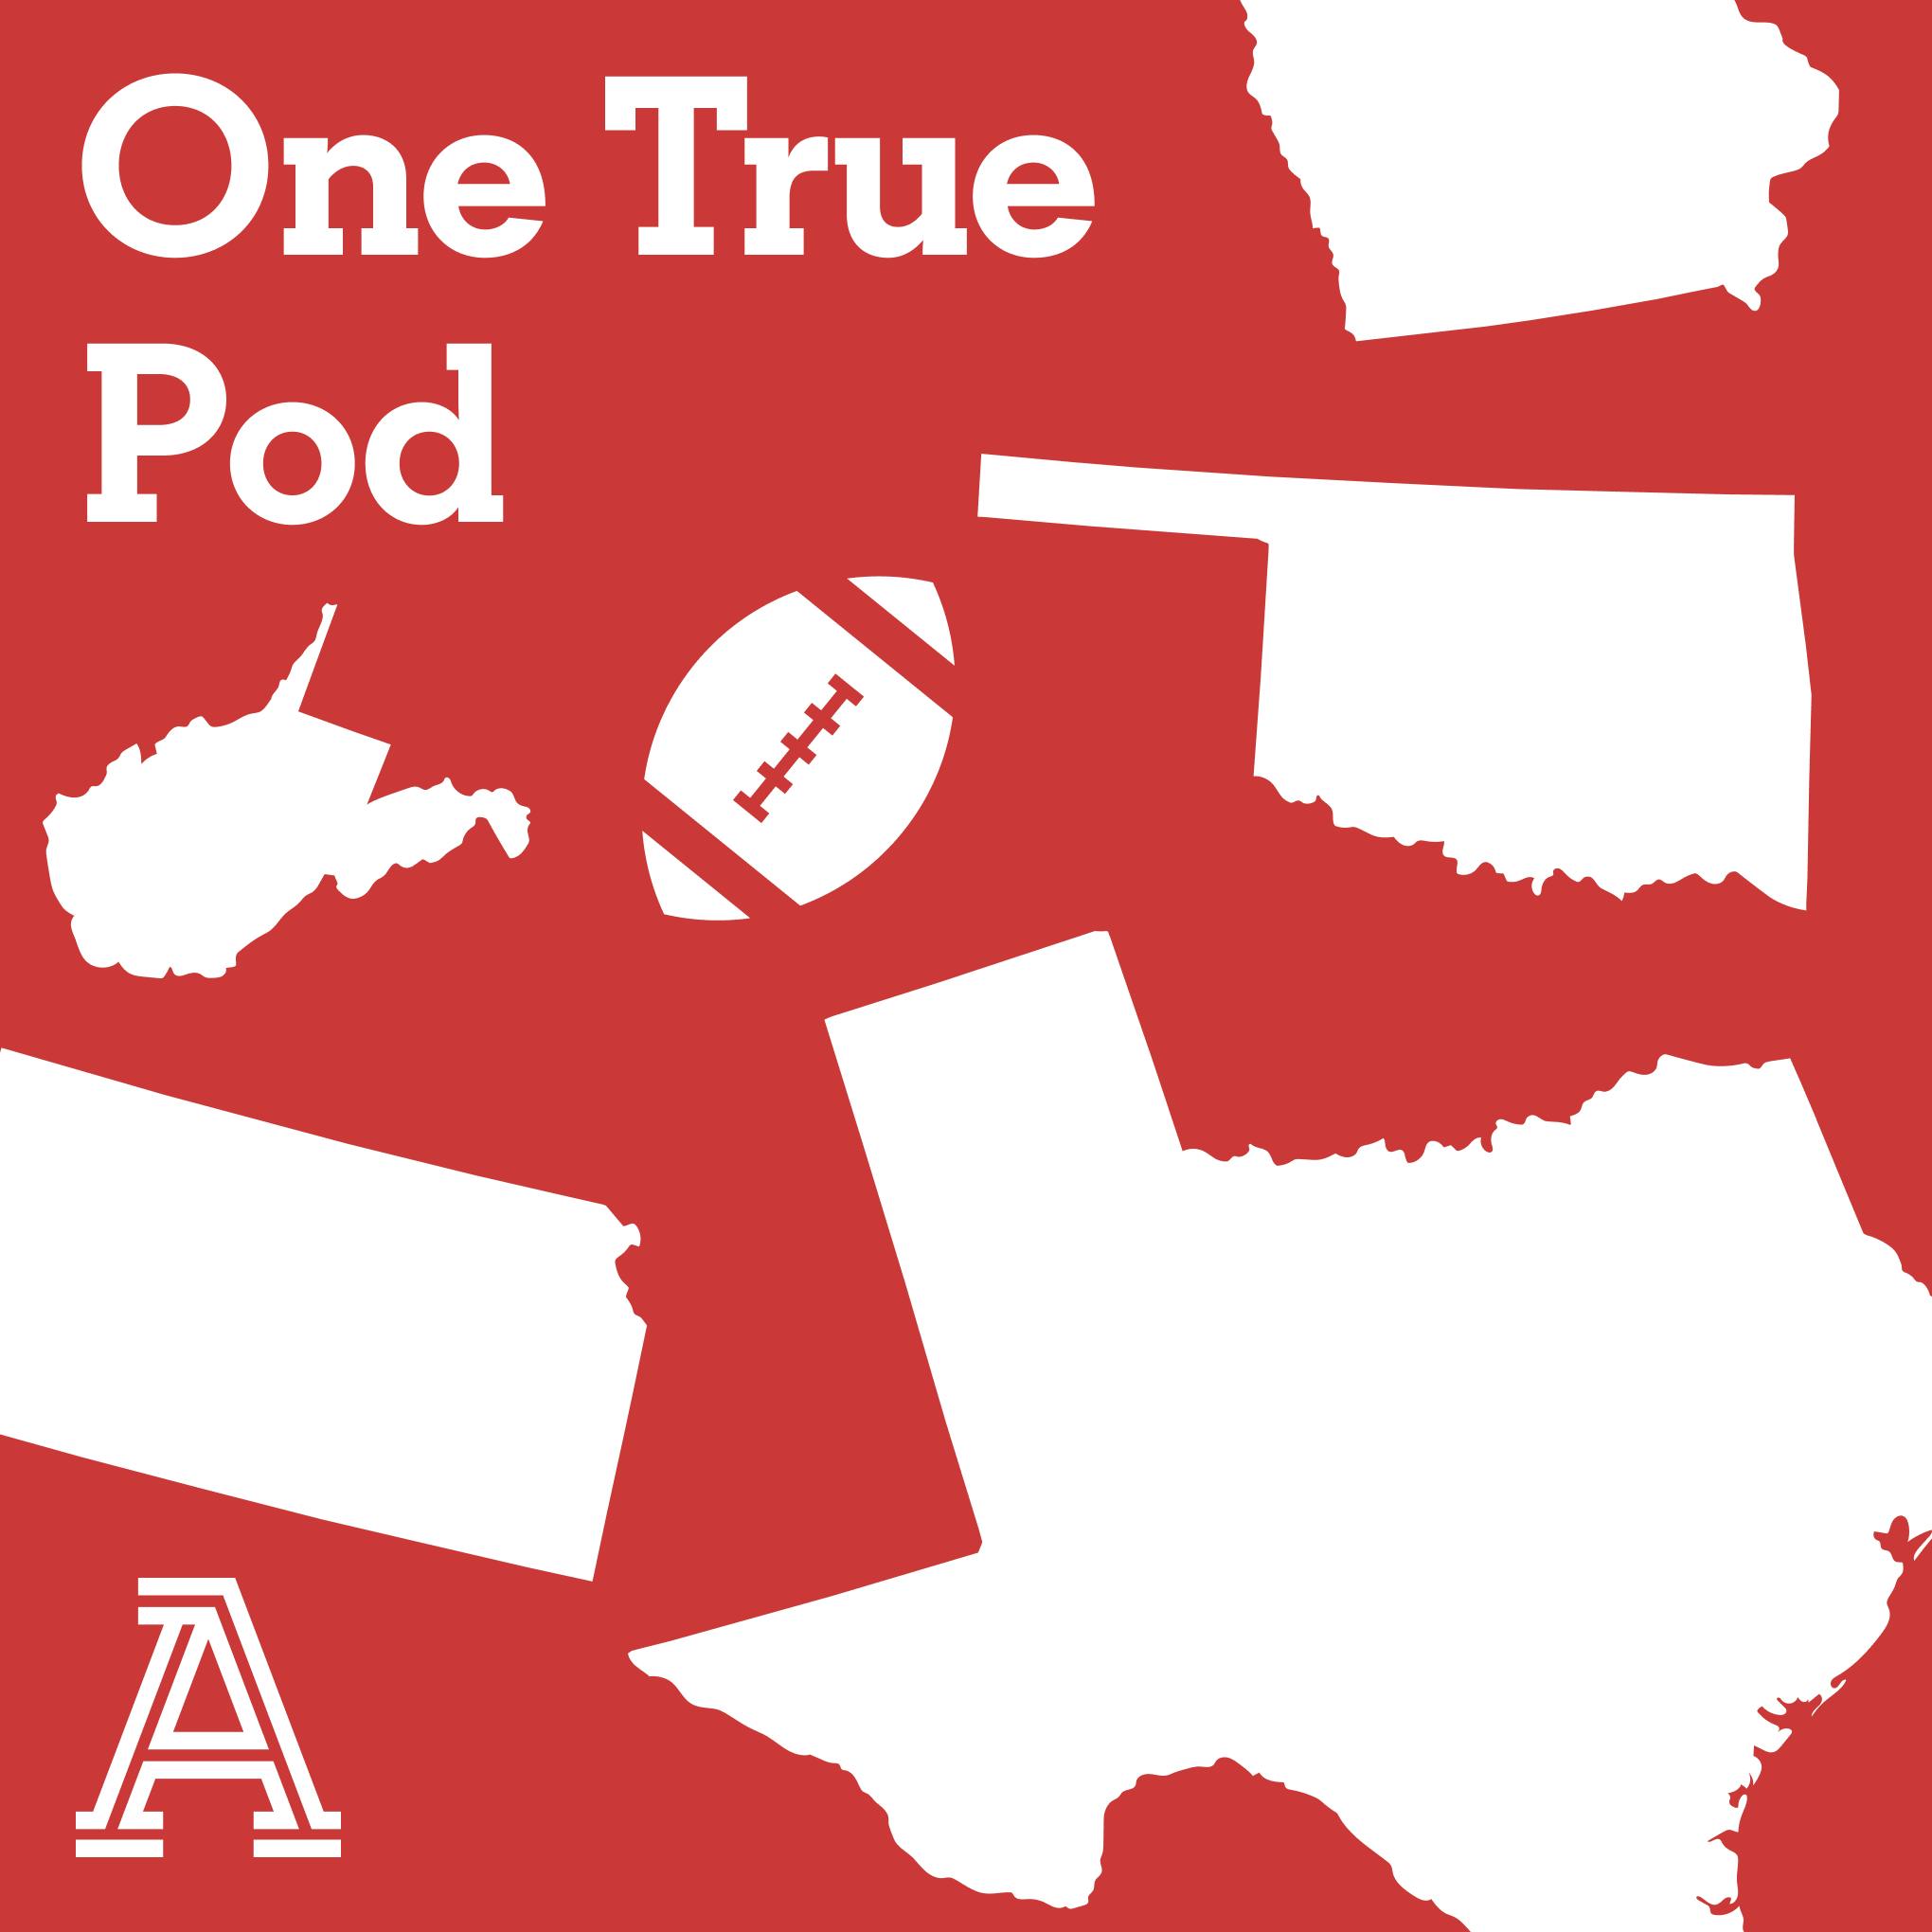 One True Pod: Baylor and Oklahoma State finish great seasons with NY6 wins